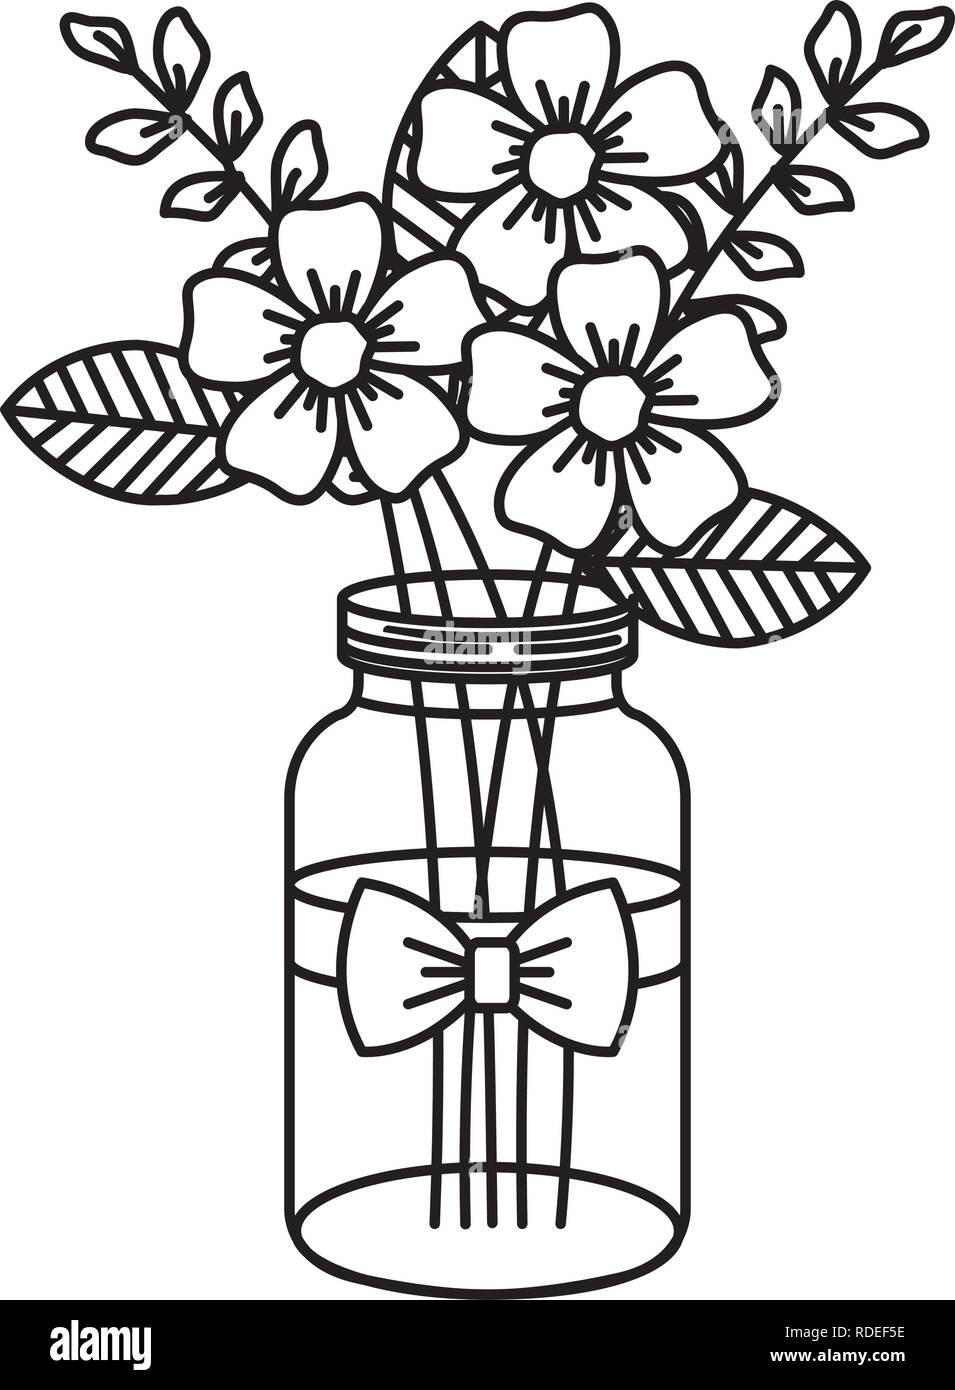 Adult Coloring Pages Flower In Mason Jars Coloring Pages